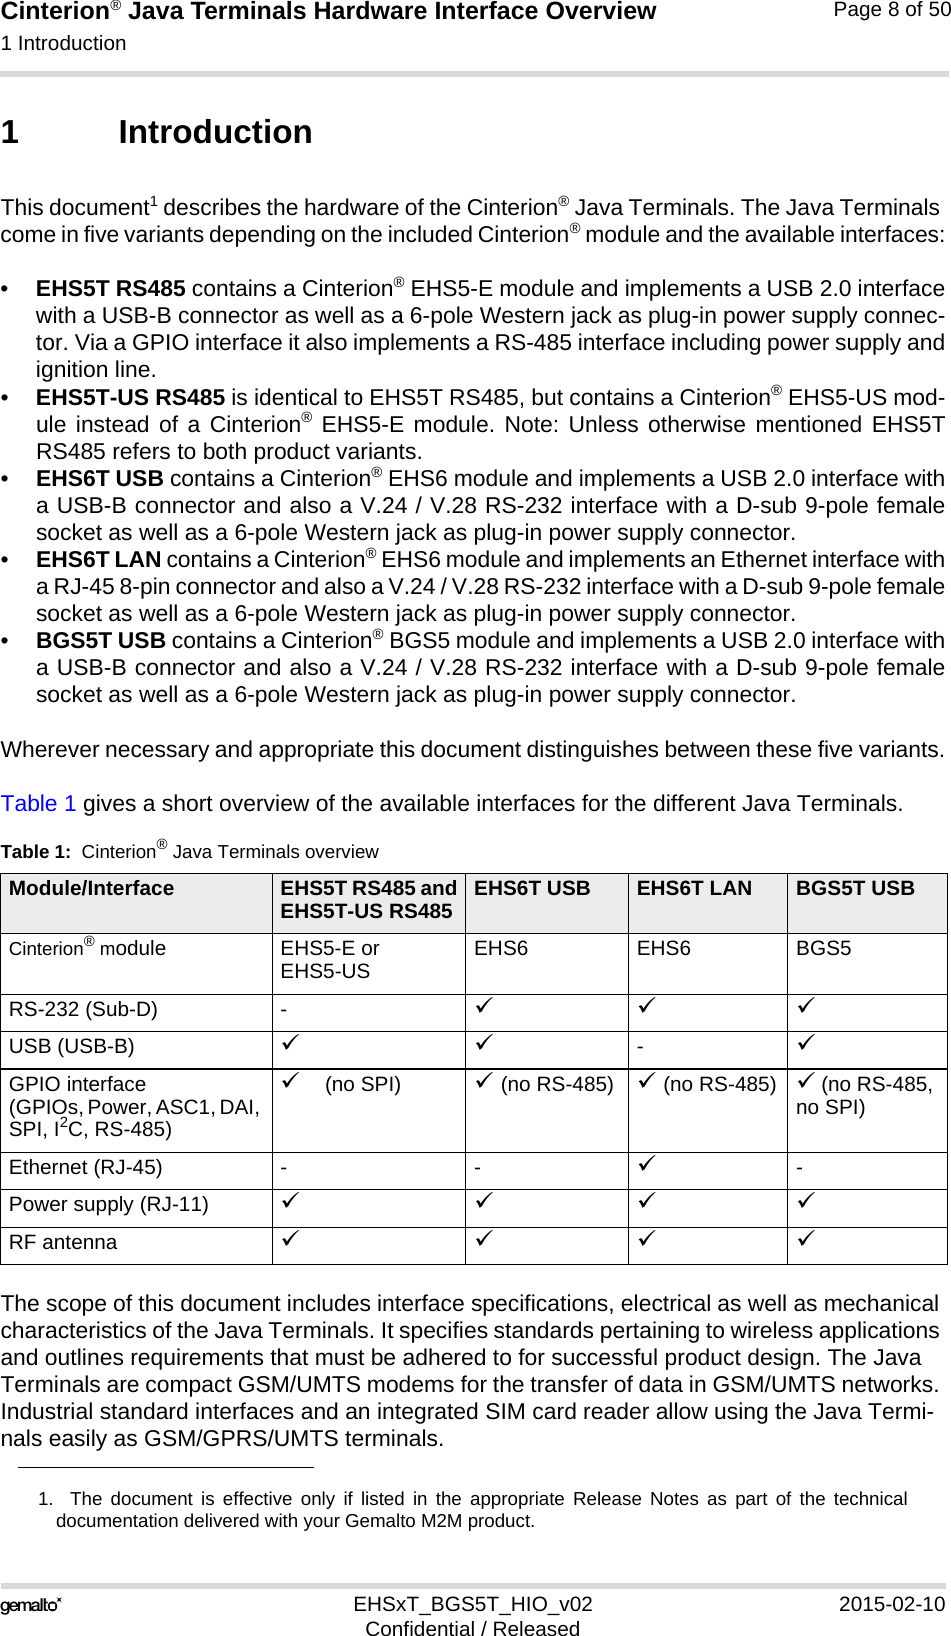 Cinterion® Java Terminals Hardware Interface Overview1 Introduction16EHSxT_BGS5T_HIO_v02 2015-02-10Confidential / ReleasedPage 8 of 501 IntroductionThis document1 describes the hardware of the Cinterion® Java Terminals. The Java Terminals come in five variants depending on the included Cinterion® module and the available interfaces:•EHS5T RS485 contains a Cinterion® EHS5-E module and implements a USB 2.0 interfacewith a USB-B connector as well as a 6-pole Western jack as plug-in power supply connec-tor. Via a GPIO interface it also implements a RS-485 interface including power supply andignition line.•EHS5T-US RS485 is identical to EHS5T RS485, but contains a Cinterion® EHS5-US mod-ule instead of a Cinterion® EHS5-E module. Note: Unless otherwise mentioned EHS5TRS485 refers to both product variants.•EHS6T USB contains a Cinterion® EHS6 module and implements a USB 2.0 interface witha USB-B connector and also a V.24 / V.28 RS-232 interface with a D-sub 9-pole femalesocket as well as a 6-pole Western jack as plug-in power supply connector.•EHS6T LAN contains a Cinterion® EHS6 module and implements an Ethernet interface witha RJ-45 8-pin connector and also a V.24 / V.28 RS-232 interface with a D-sub 9-pole femalesocket as well as a 6-pole Western jack as plug-in power supply connector.•BGS5T USB contains a Cinterion® BGS5 module and implements a USB 2.0 interface witha USB-B connector and also a V.24 / V.28 RS-232 interface with a D-sub 9-pole femalesocket as well as a 6-pole Western jack as plug-in power supply connector. Wherever necessary and appropriate this document distinguishes between these five variants.Table 1 gives a short overview of the available interfaces for the different Java Terminals.The scope of this document includes interface specifications, electrical as well as mechanical characteristics of the Java Terminals. It specifies standards pertaining to wireless applications and outlines requirements that must be adhered to for successful product design. The Java Terminals are compact GSM/UMTS modems for the transfer of data in GSM/UMTS networks. Industrial standard interfaces and an integrated SIM card reader allow using the Java Termi-nals easily as GSM/GPRS/UMTS terminals. 1.  The document is effective only if listed in the appropriate Release Notes as part of the technicaldocumentation delivered with your Gemalto M2M product.Table 1:  Cinterion® Java Terminals overviewModule/Interface EHS5T RS485 andEHS5T-US RS485 EHS6T USB EHS6T LAN BGS5T USBCinterion® module EHS5-E or EHS5-US EHS6 EHS6 BGS5RS-232 (Sub-D) - USB (USB-B) -GPIO interface(GPIOs, Power, ASC1, DAI, SPI, I2C, RS-485)(no SPI)  (no RS-485)  (no RS-485)  (no RS-485, no SPI)Ethernet (RJ-45) - - -Power supply (RJ-11) RF antenna 